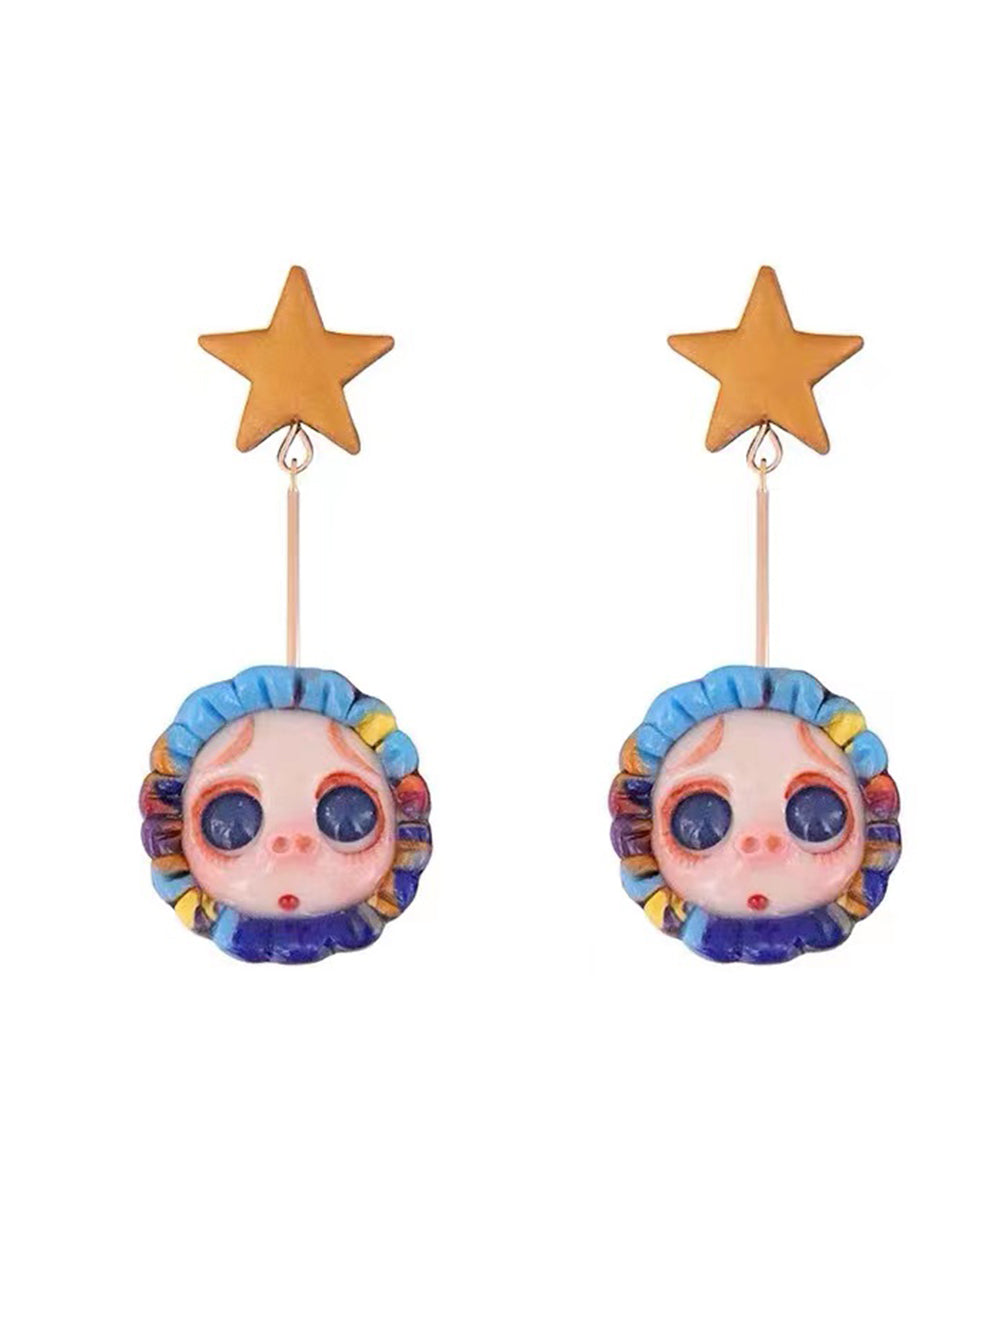 MUKTANK×QUANDO Starry Pig Sterling Silver Earrings/Soft Pad Ear Clips